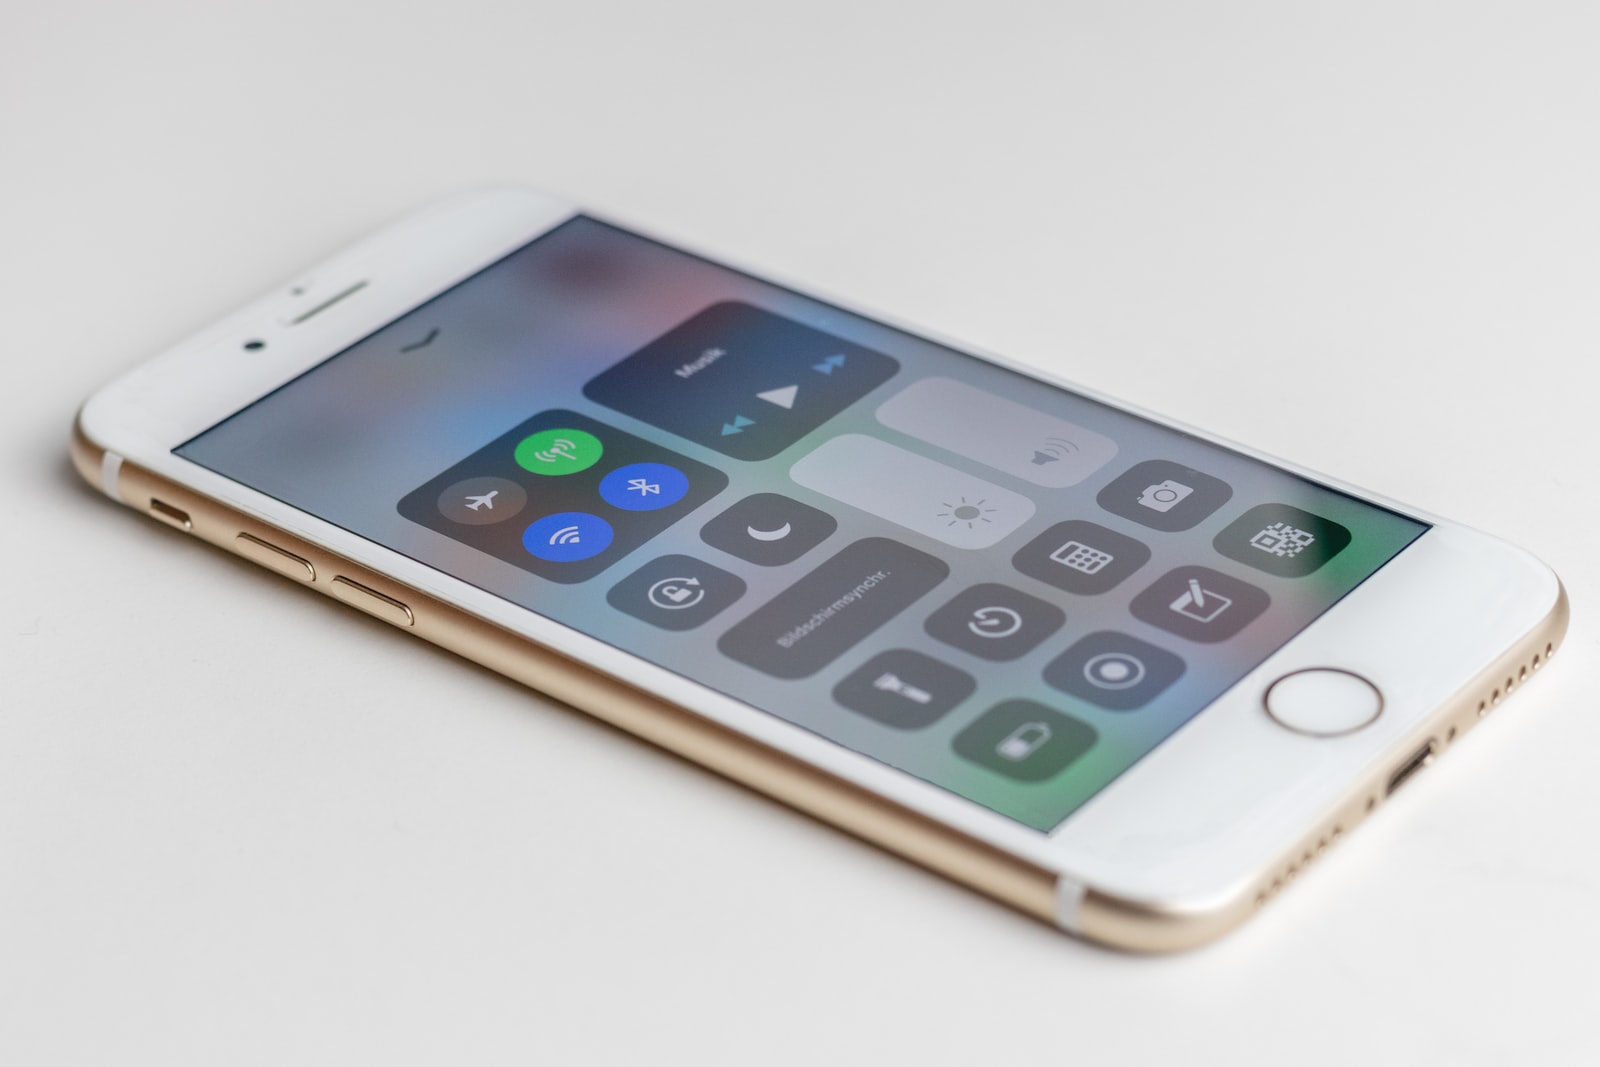 gold iPhone 6s is turned on